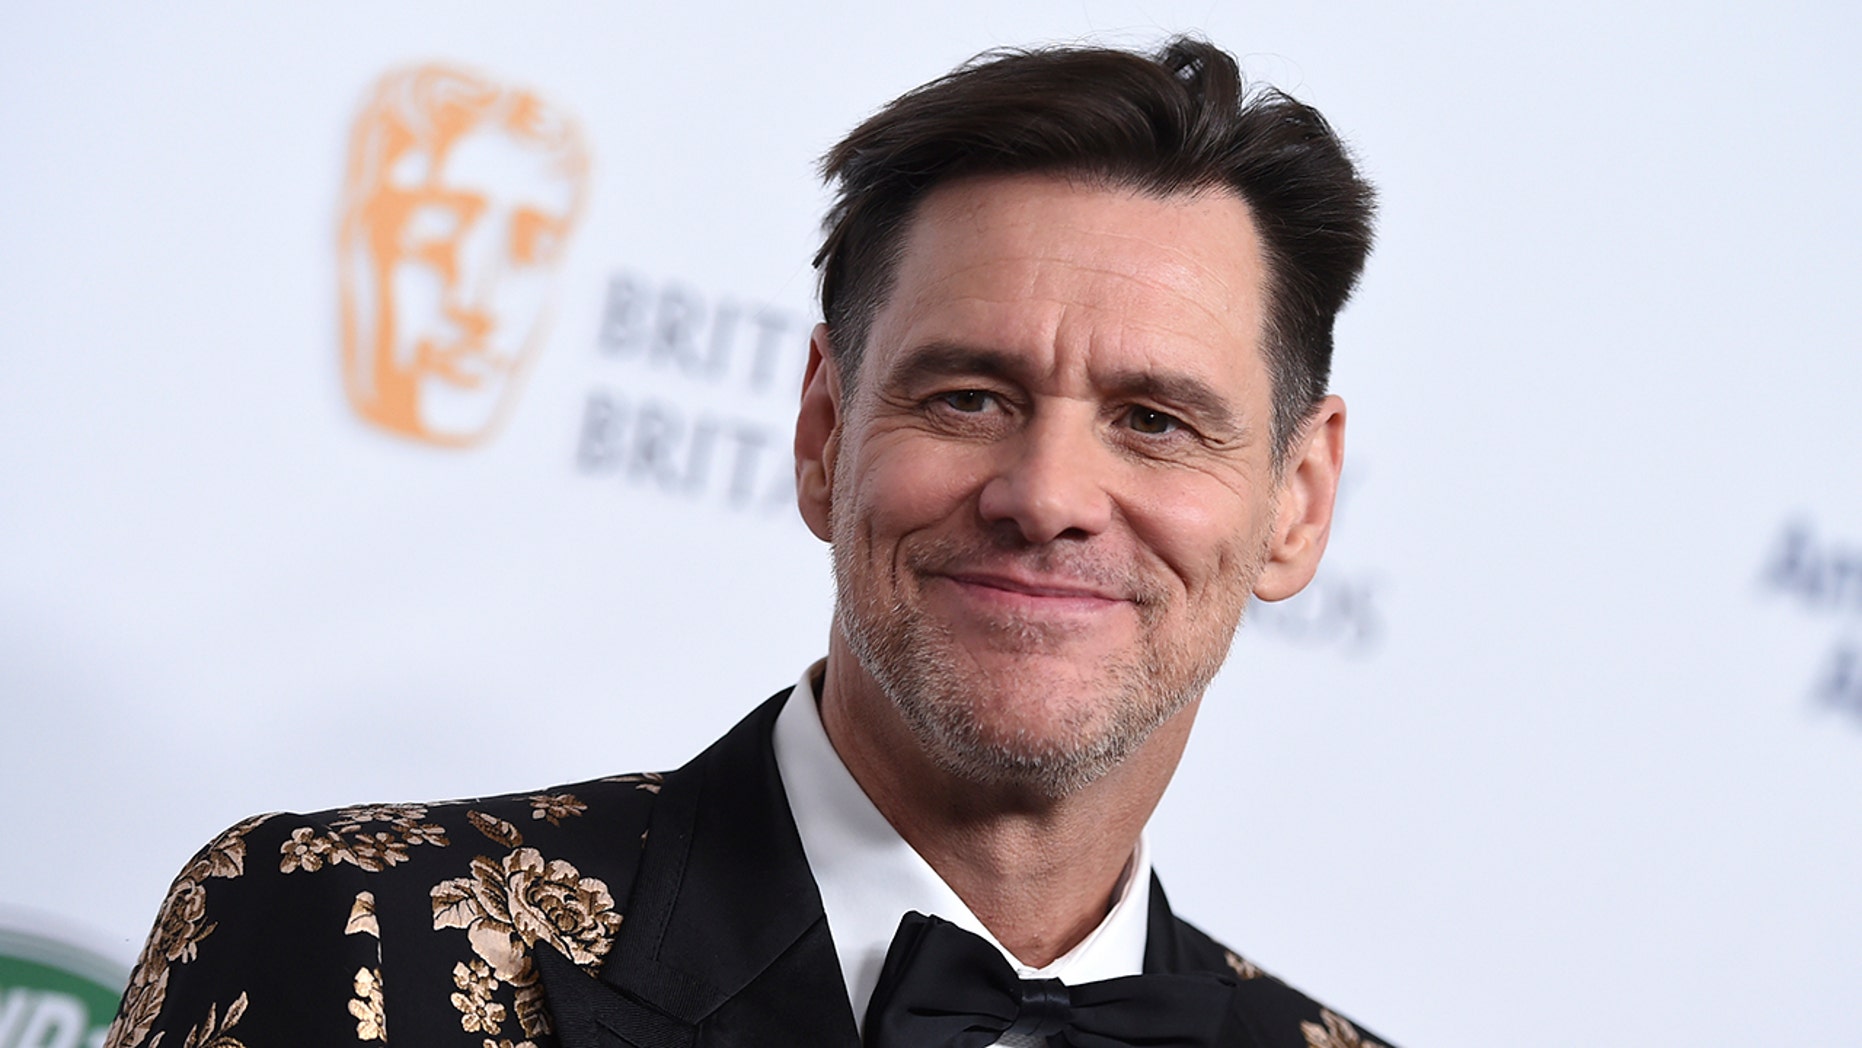 Jim Carrey arrives at the 2018 BAFTA Los Angeles Britannia Awards at the Beverly Hilton on Friday, Oct. 26, 2018, in Beverly Hills, Calif. (Photo by Jordan Strauss/Invision/AP)